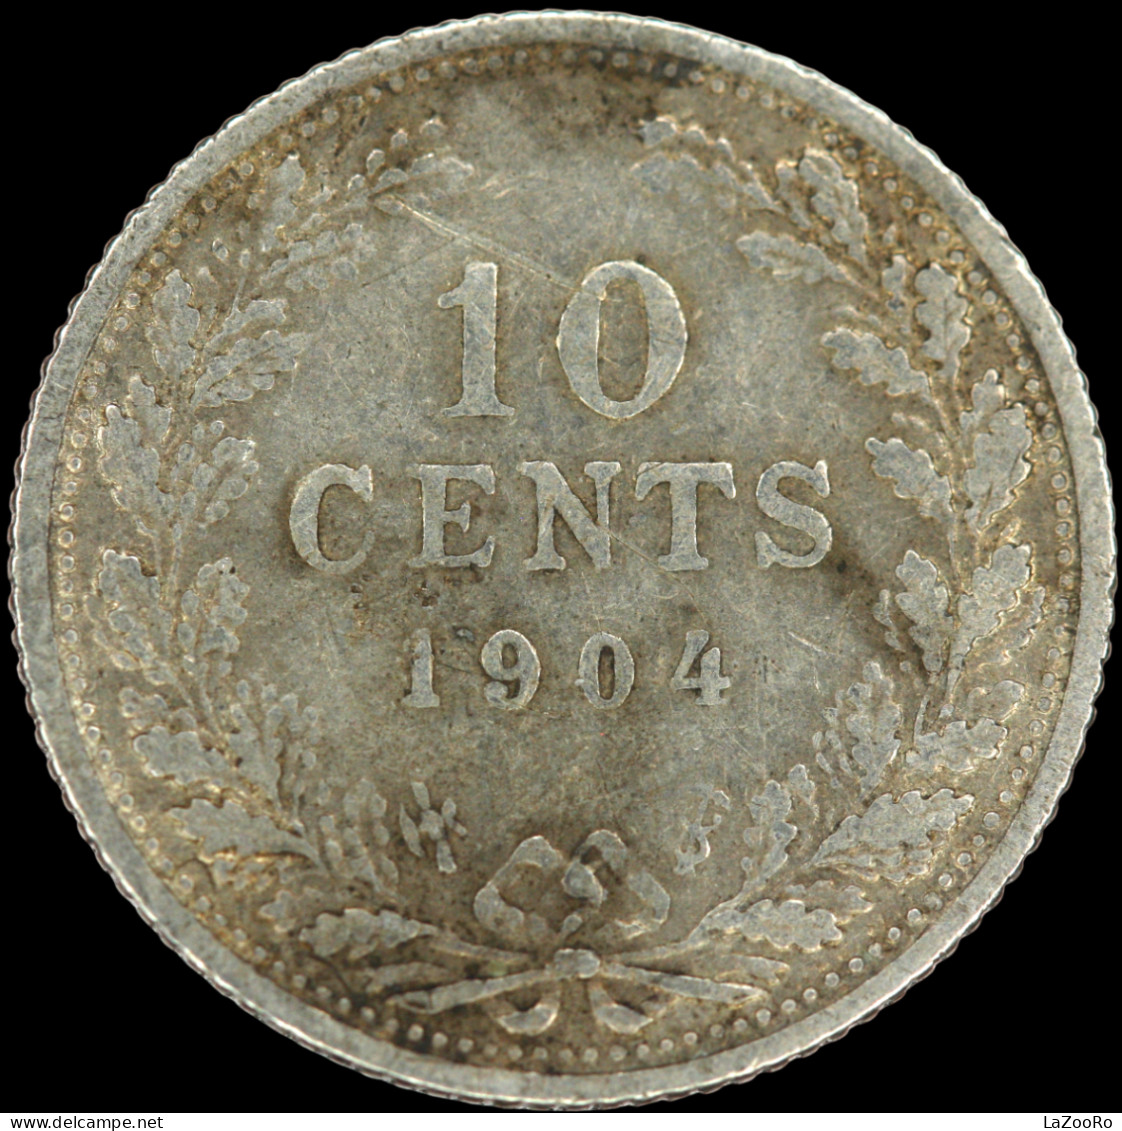 LaZooRo: Netherlands 10 Cents 1904 VF - Silver - 10 Cent